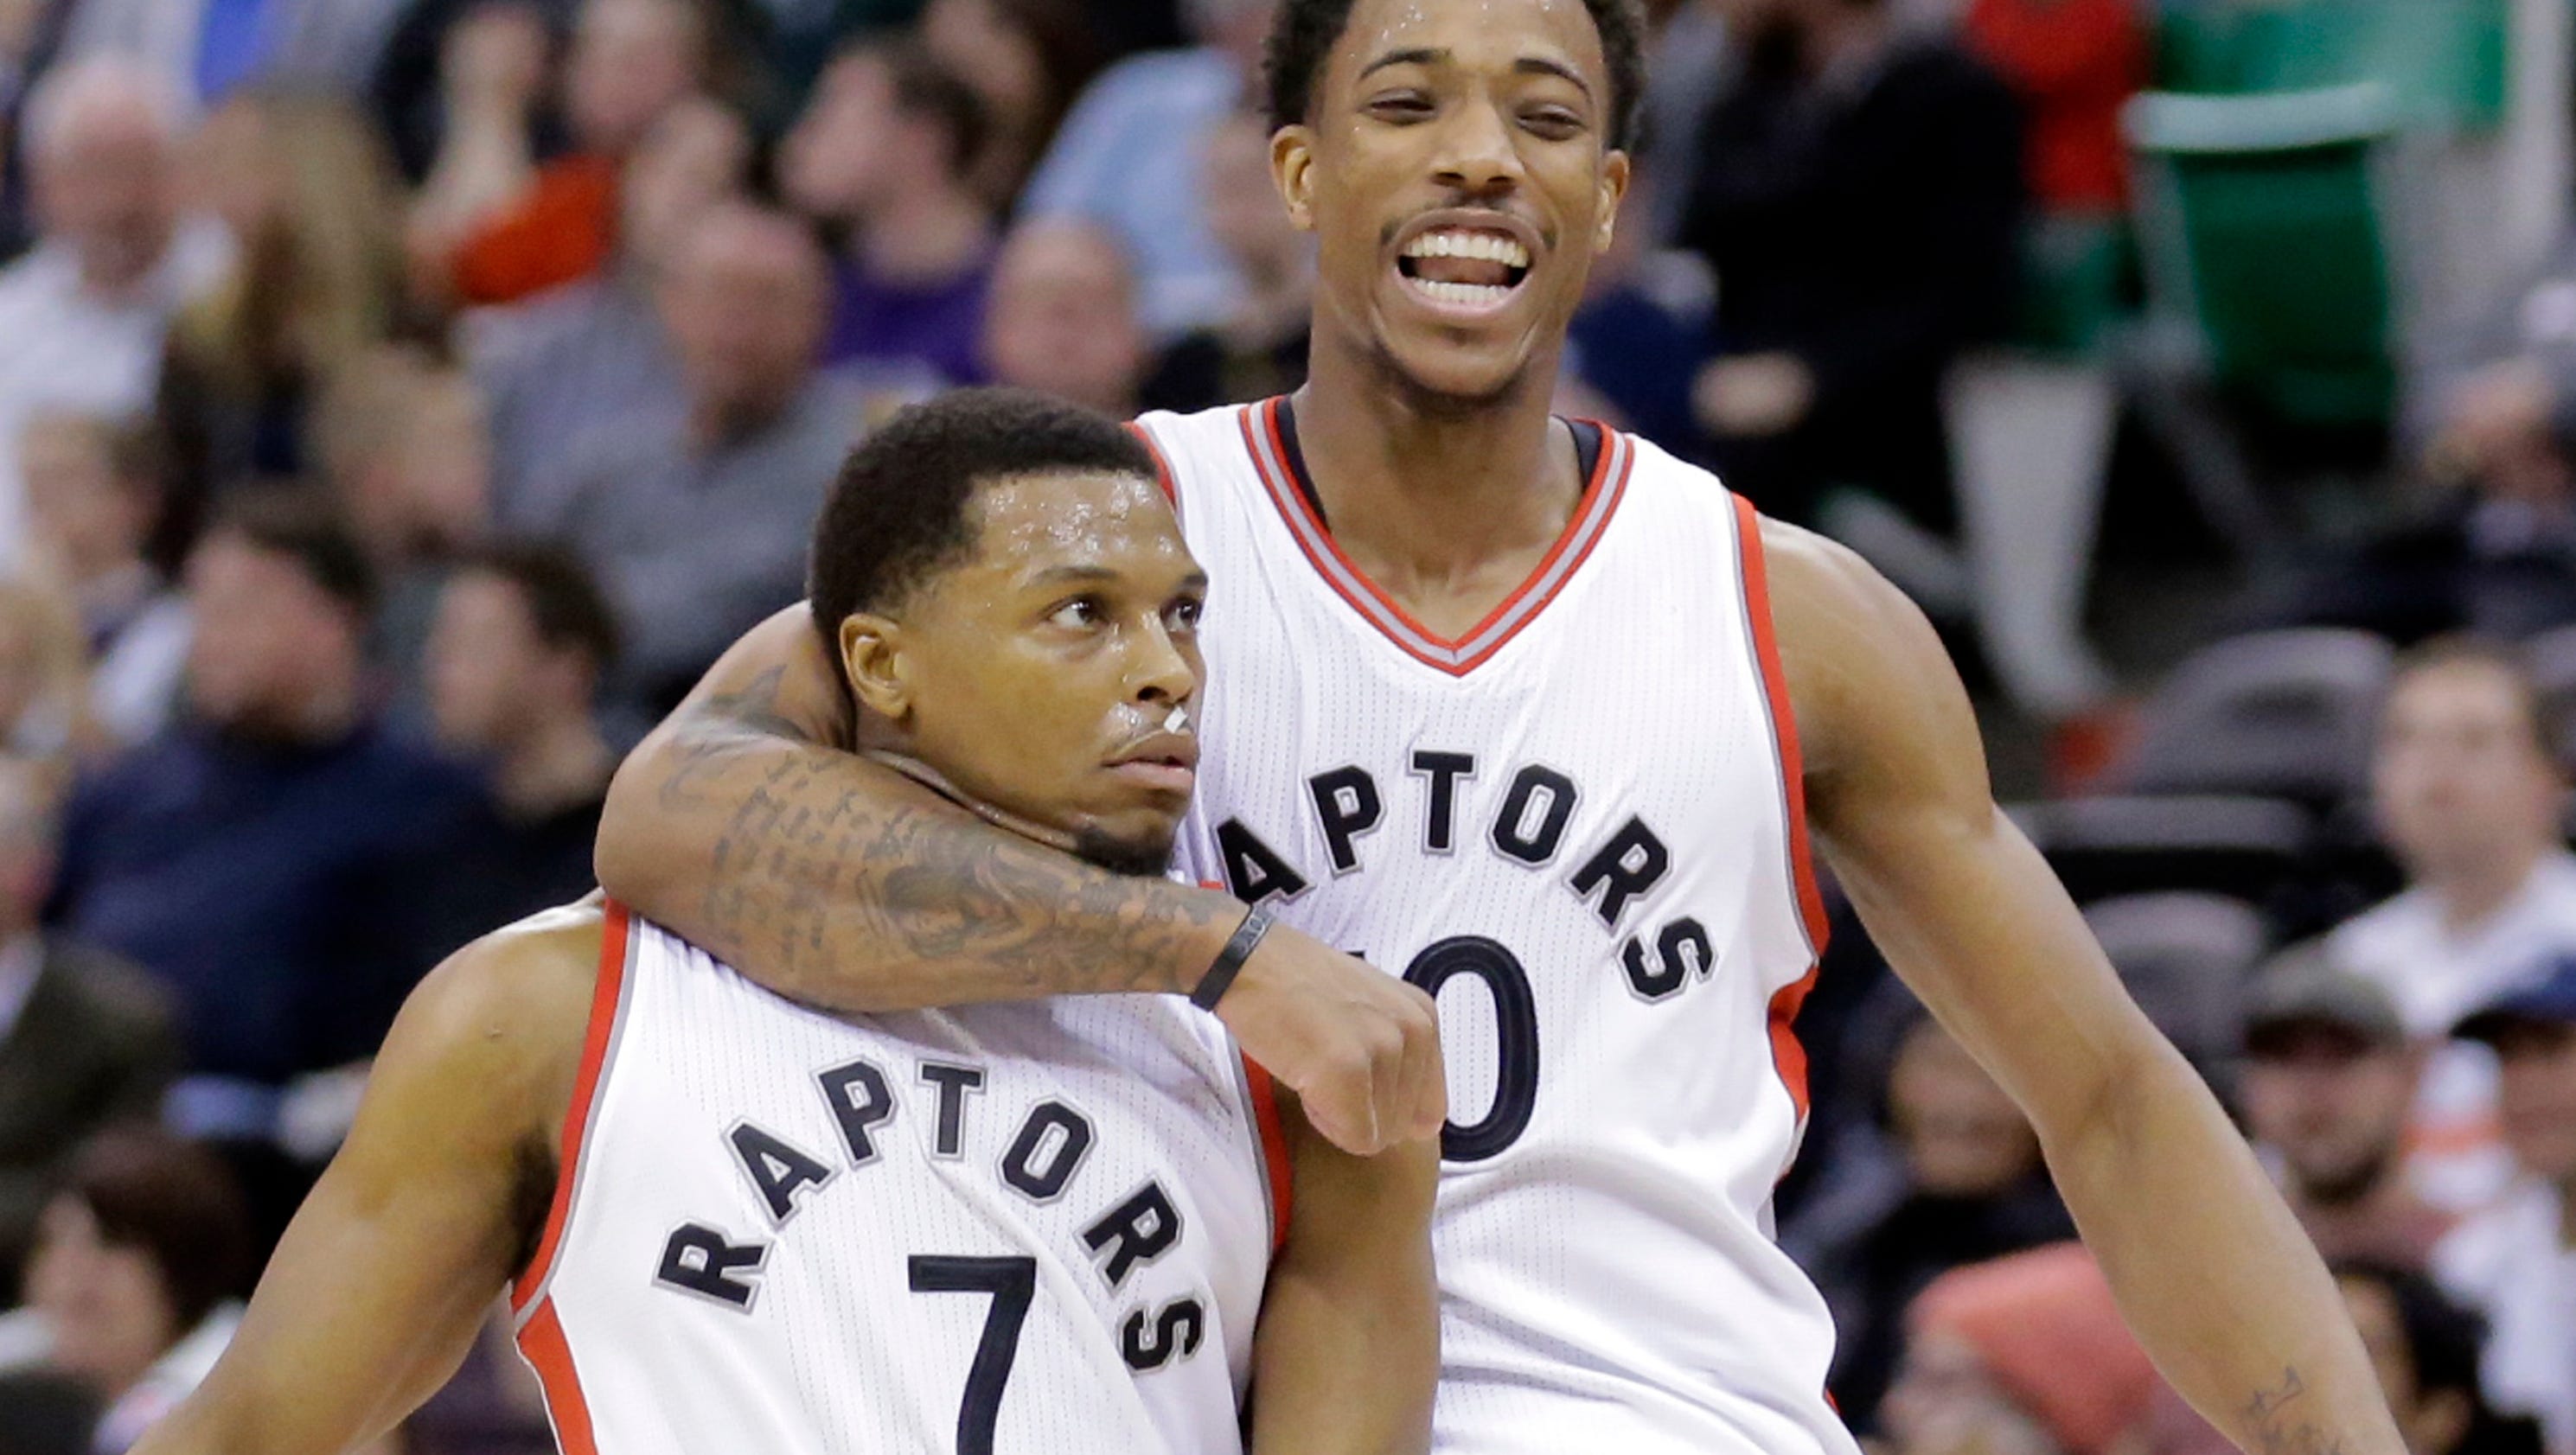 At 21-8, it might be time to keep an eye on the Toronto Raptors